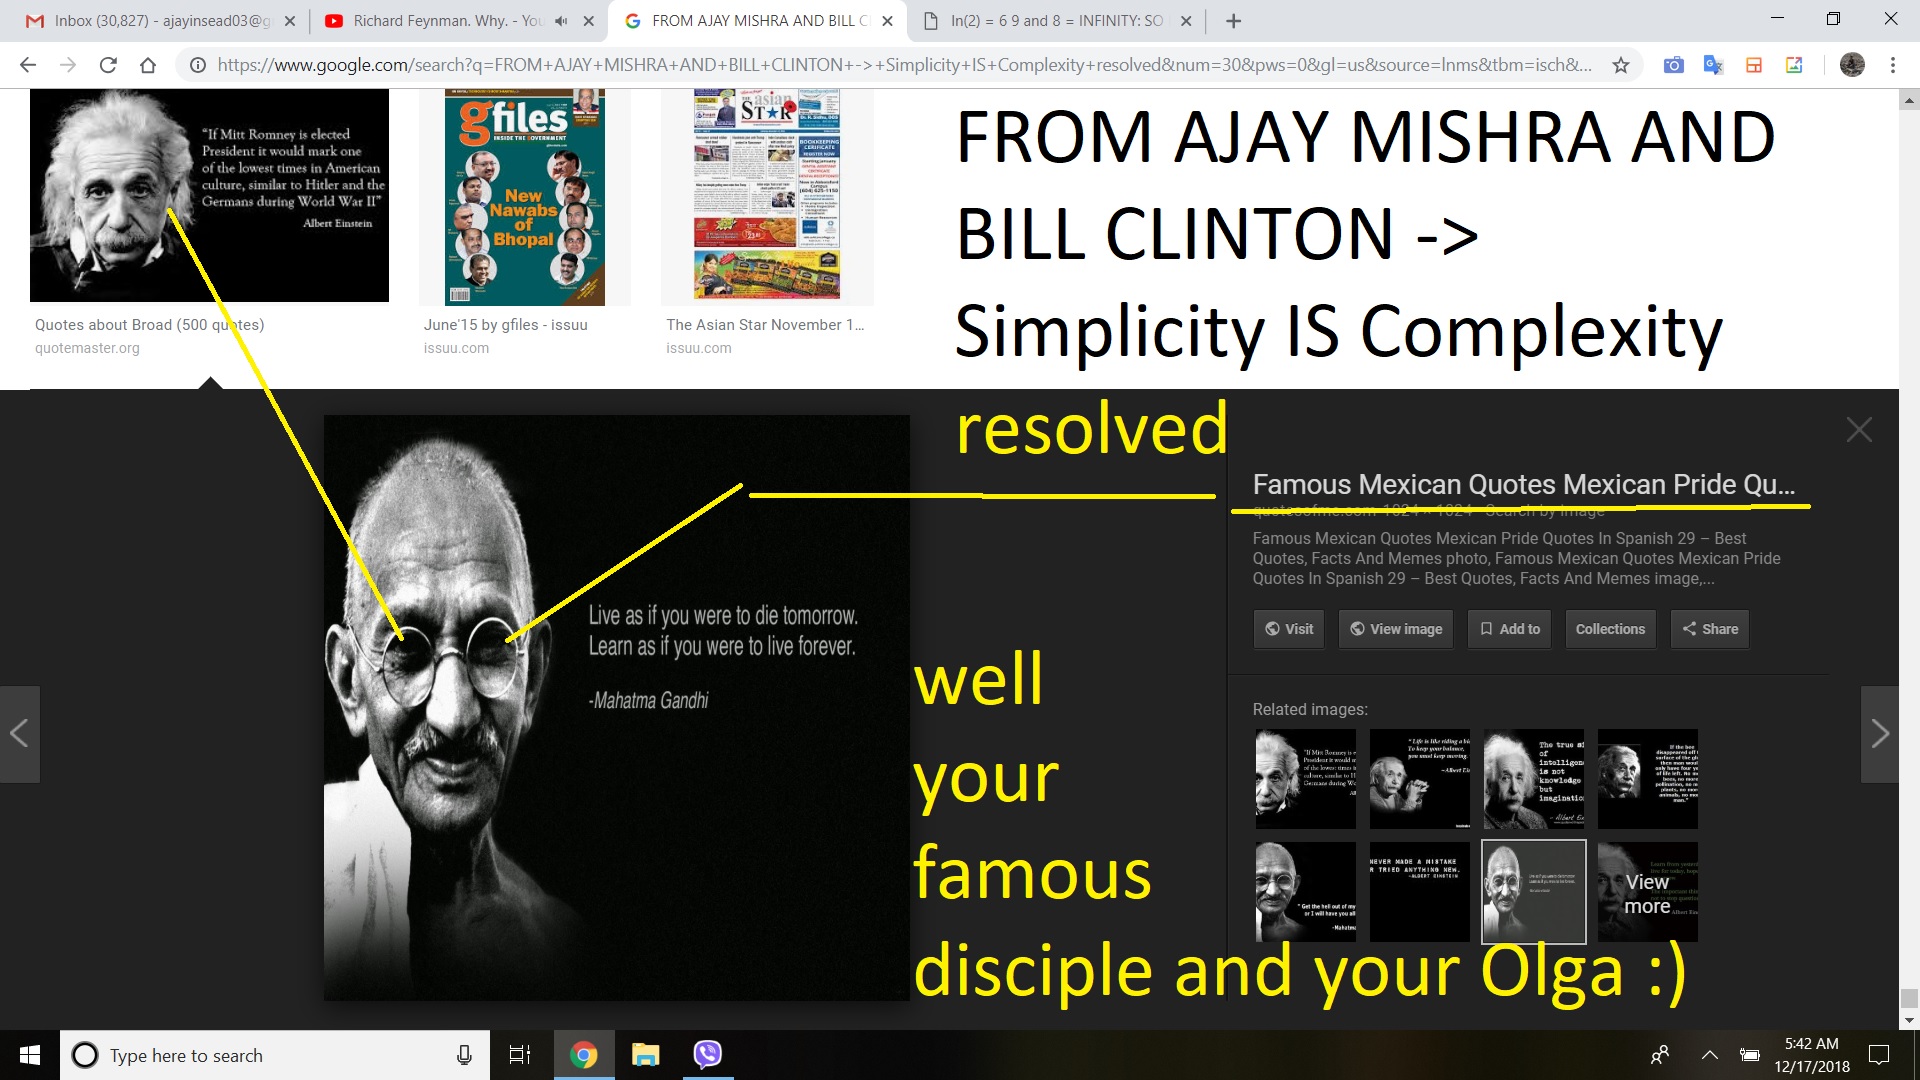 FROM-AJAY-MISHRA-AND-BILL-CLINTON-Simplicity-IS-Complexity-resolved